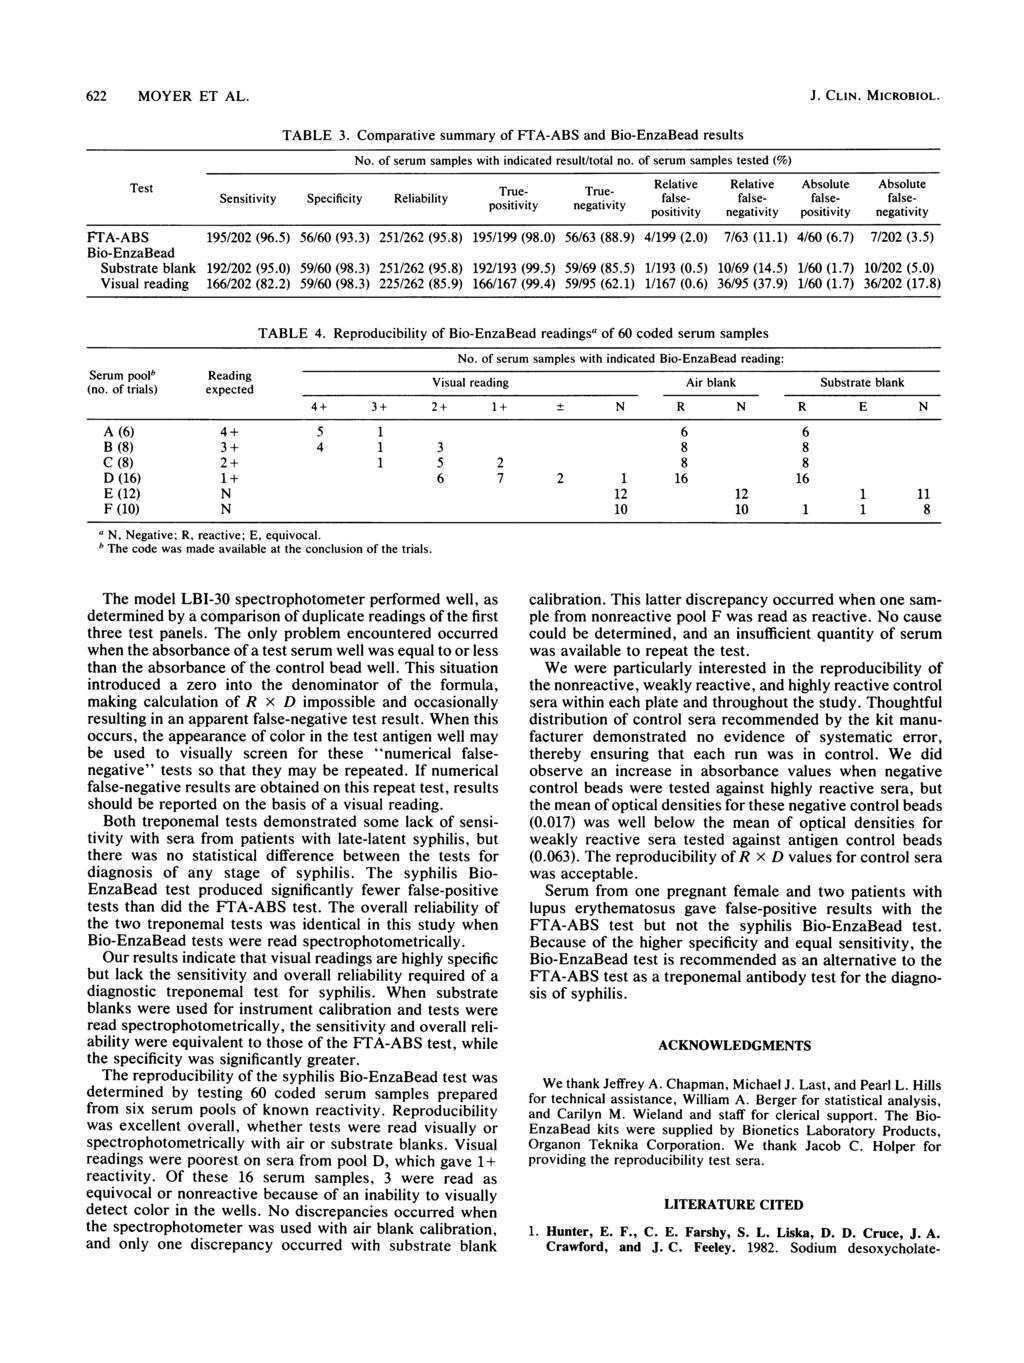 622 MOYER ET AL. J. CLIN. MICROBIOL. TABLE 3. Comparative summary of FTA-ABS and Bio-EnzaBead results No. of serum samples with indicated result/total no.